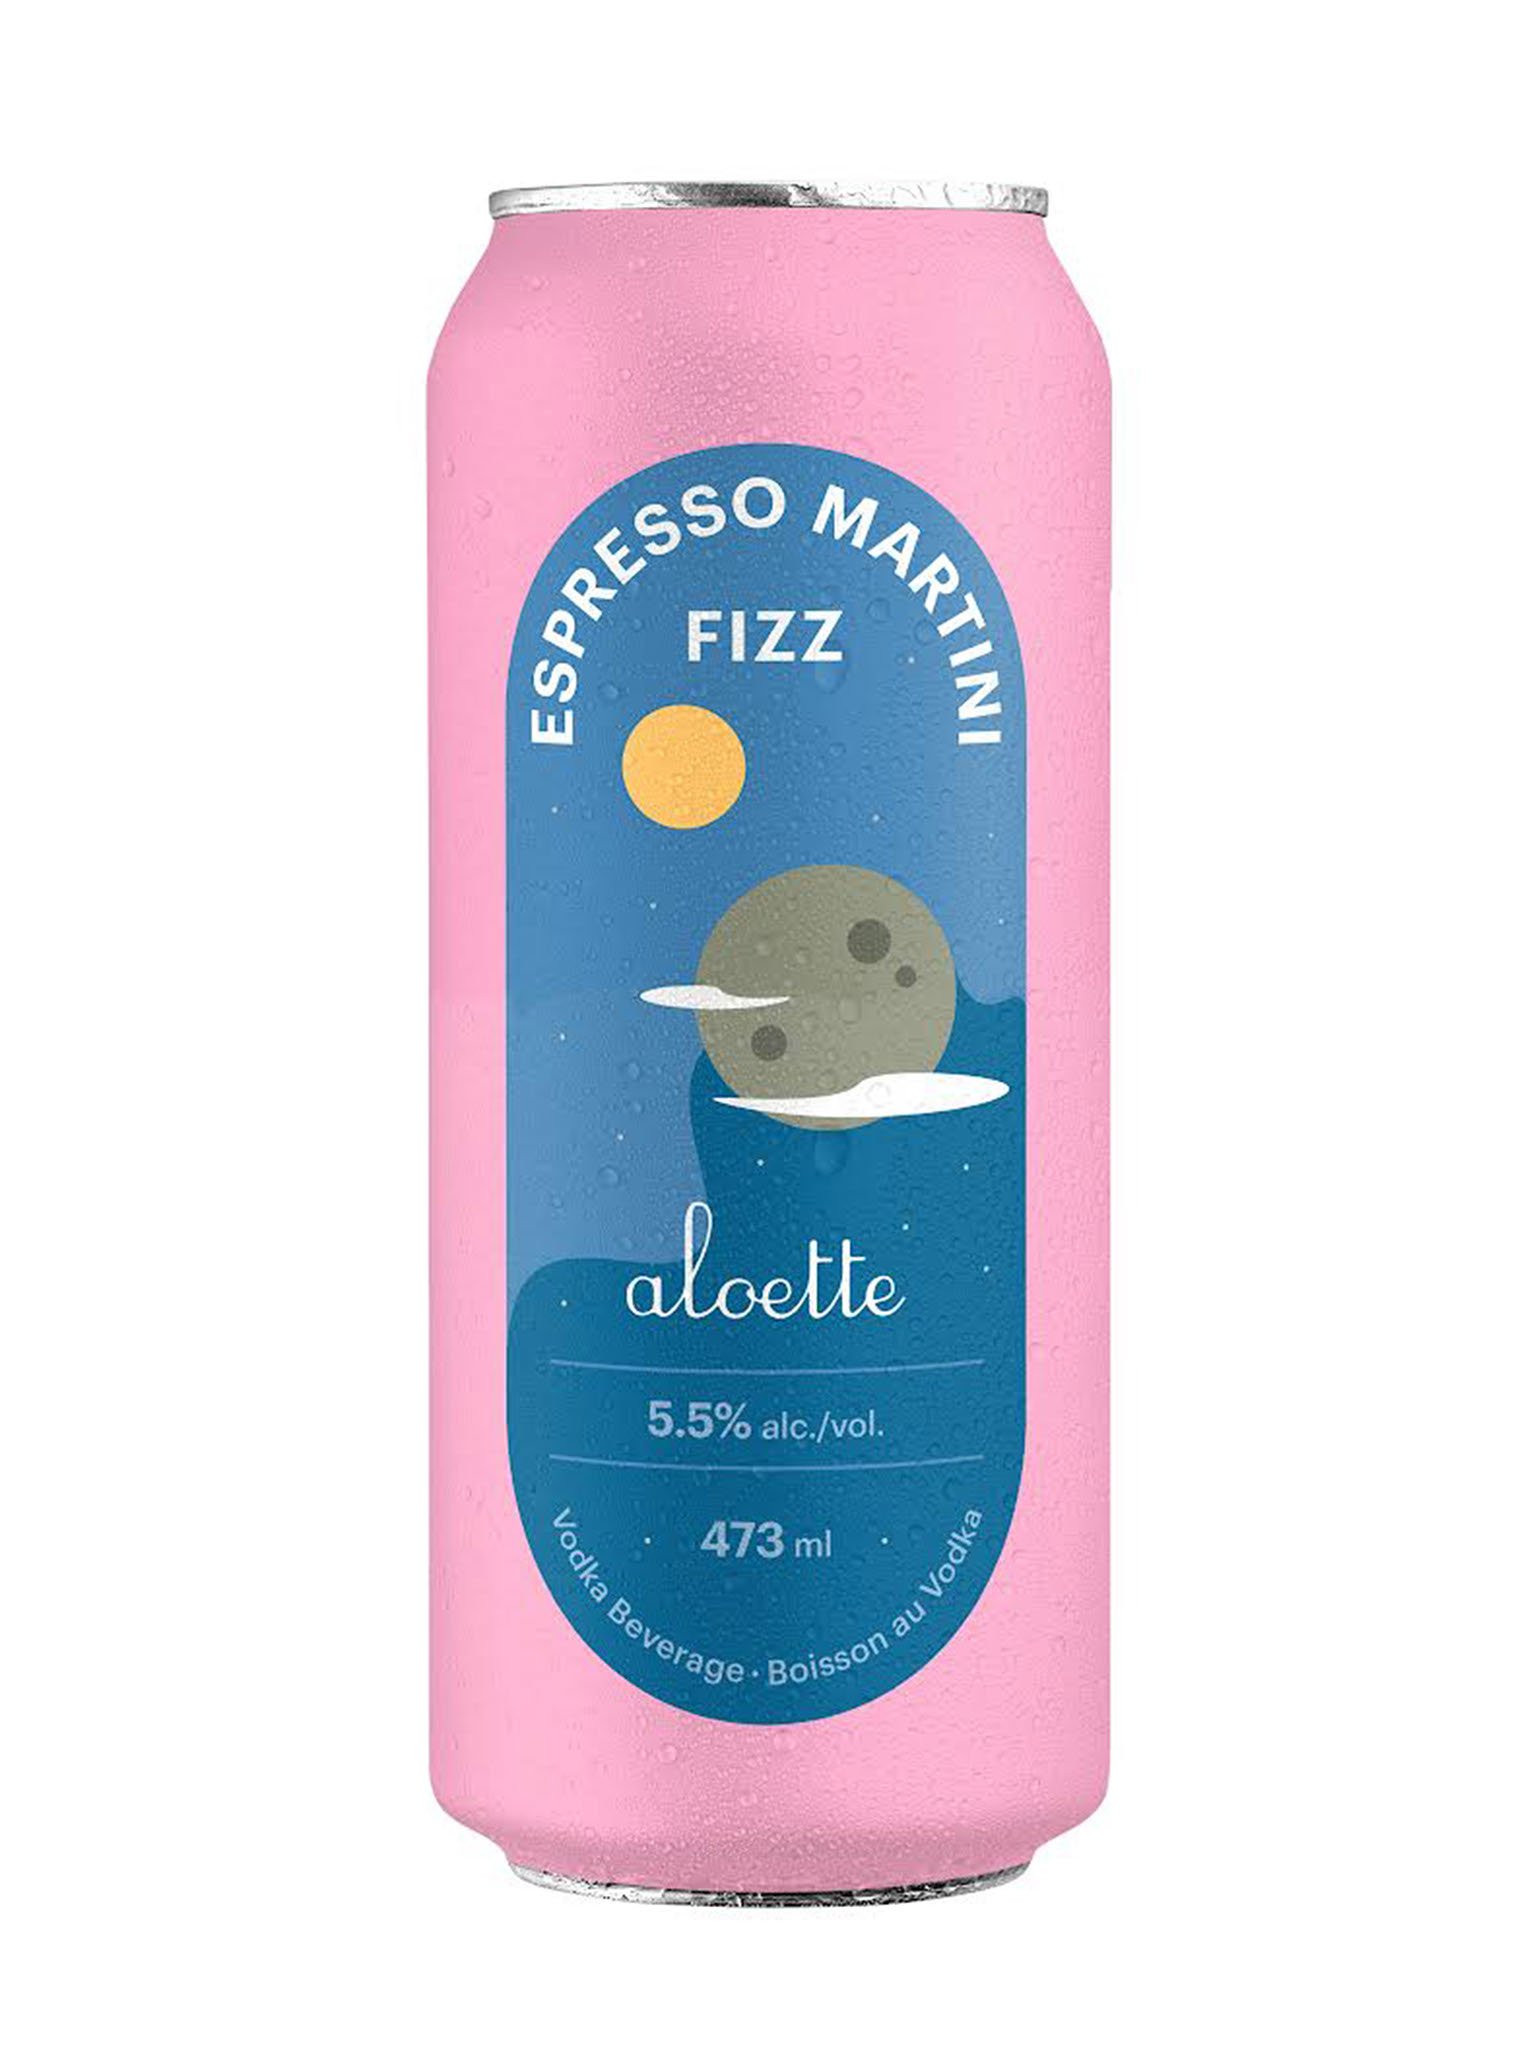 A can of Aloette espresso martini fizz cocktail on a white background